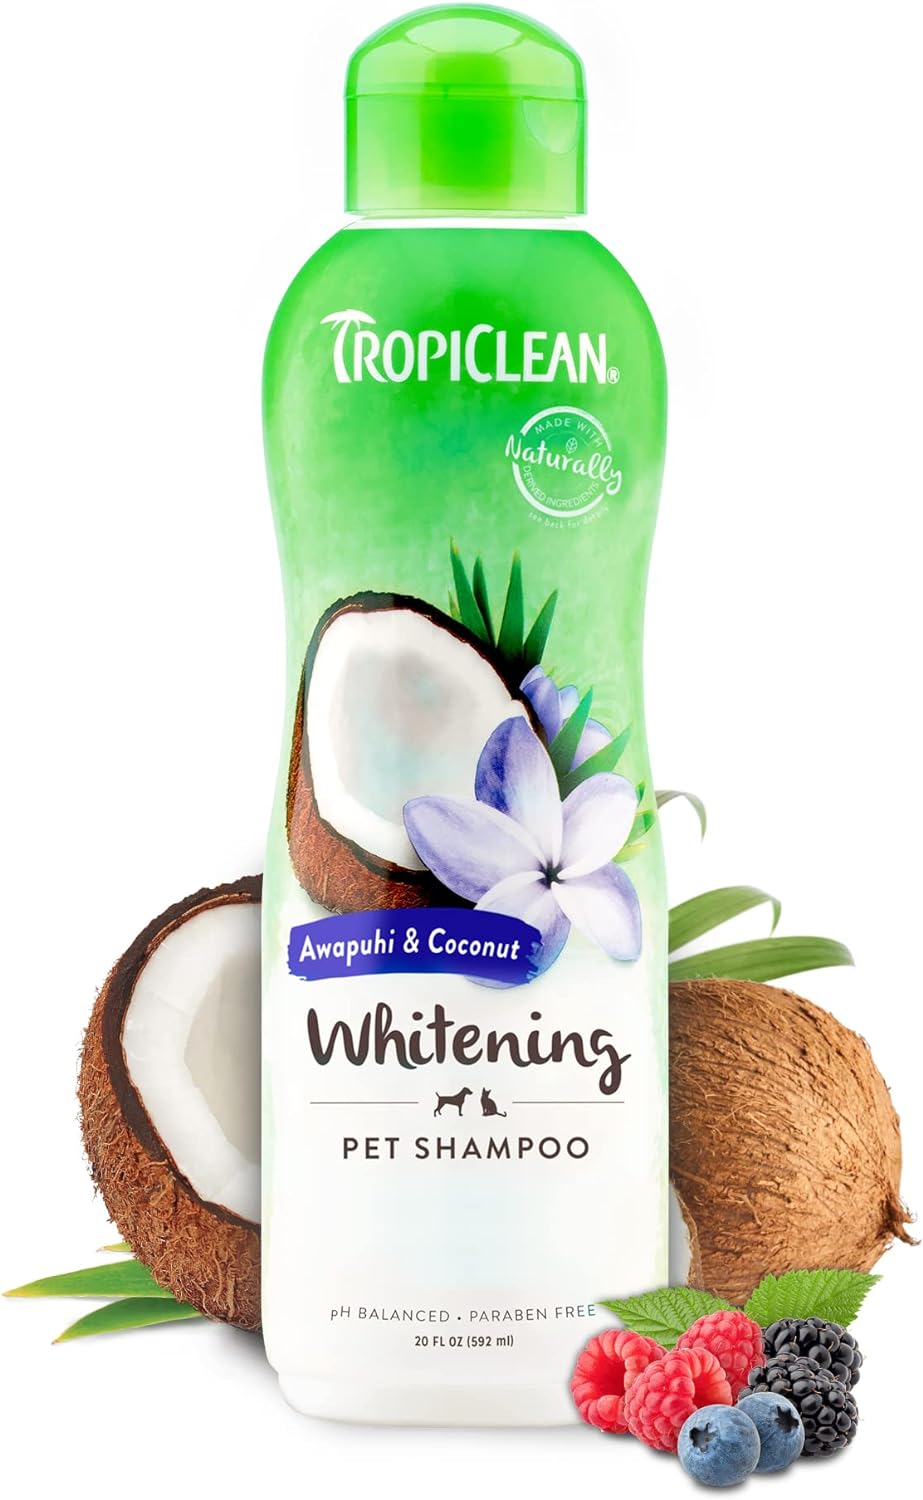 TropiClean Dog Shampoo Grooming Supplies - Whitening Dog and Cat Shampoo for Whitening Coats - Soap and Paraben Free -Derived from Natural Ingredients - Used by Groomers - Awapuhi & Coconut, 592ml?TRAWSH20Z